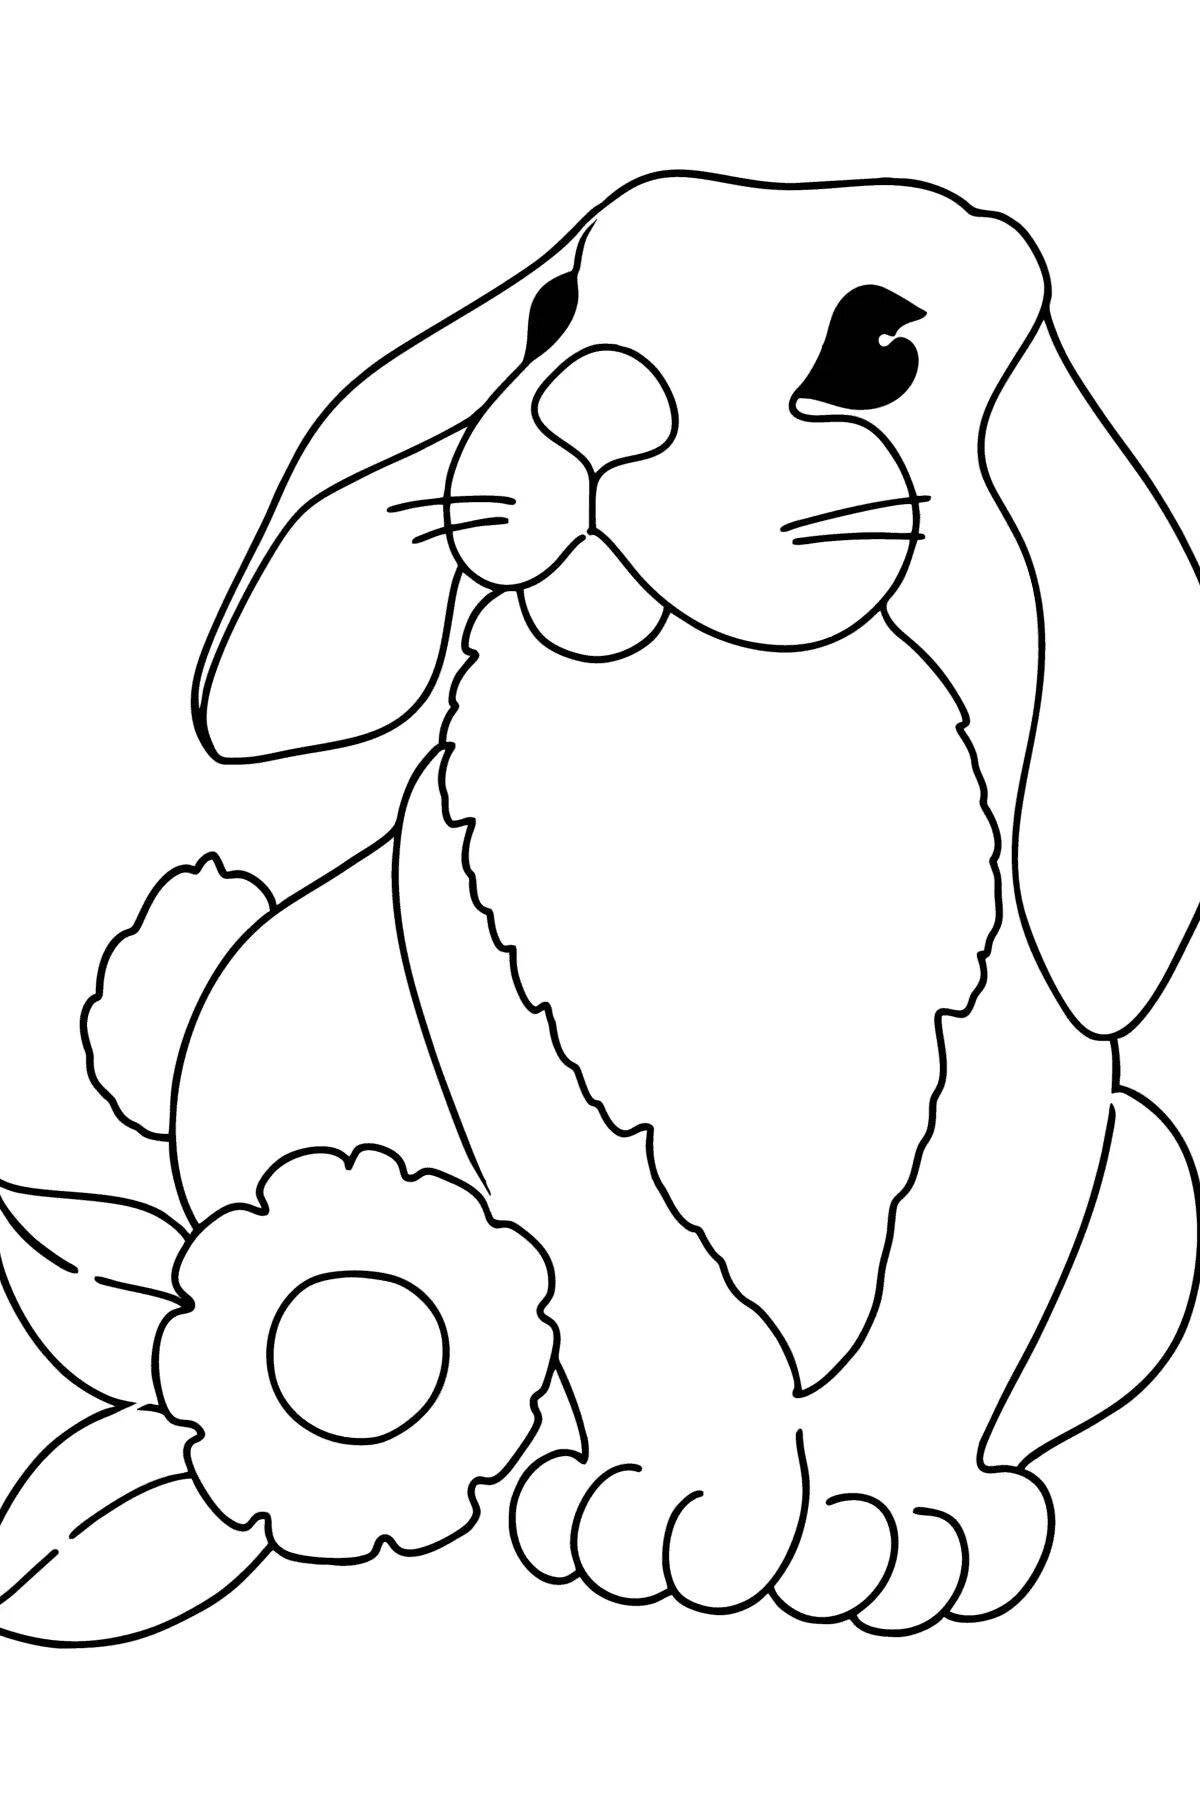 Fairytale rabbit coloring book for children 2-3 years old